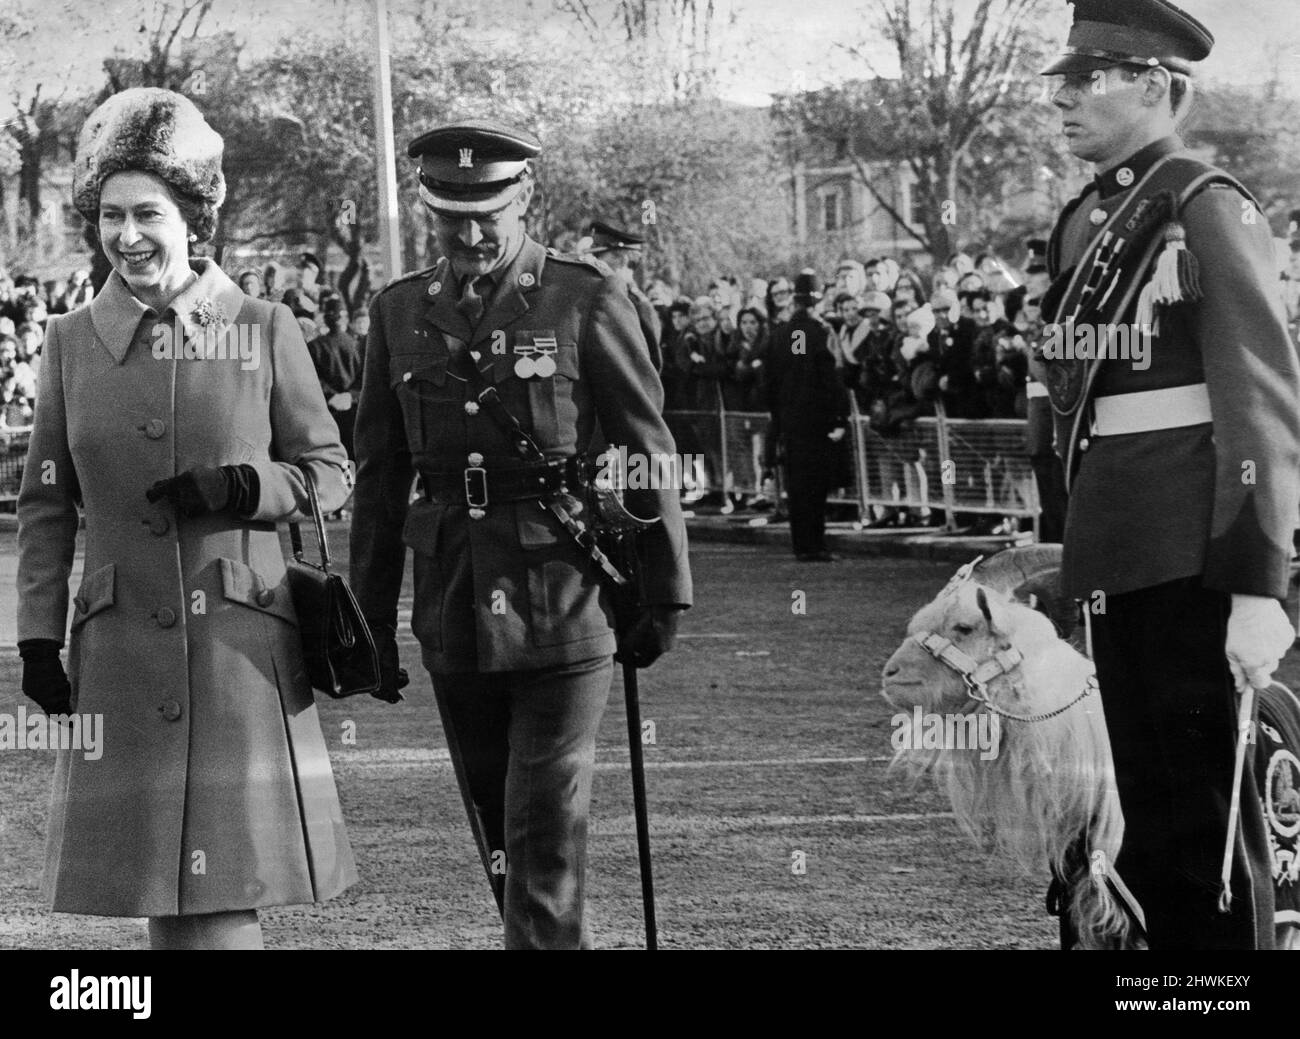 Dewi, regimental mascot of the 3rd (V) Battalion, Royal Regiment of Wales, is on his nest behaviour as Queen Elizabeth II completes her inpection, accompanied by Liut-Col. B. M Pim, Commander of the Cardiff Garrison. 19th November 1971. Stock Photo